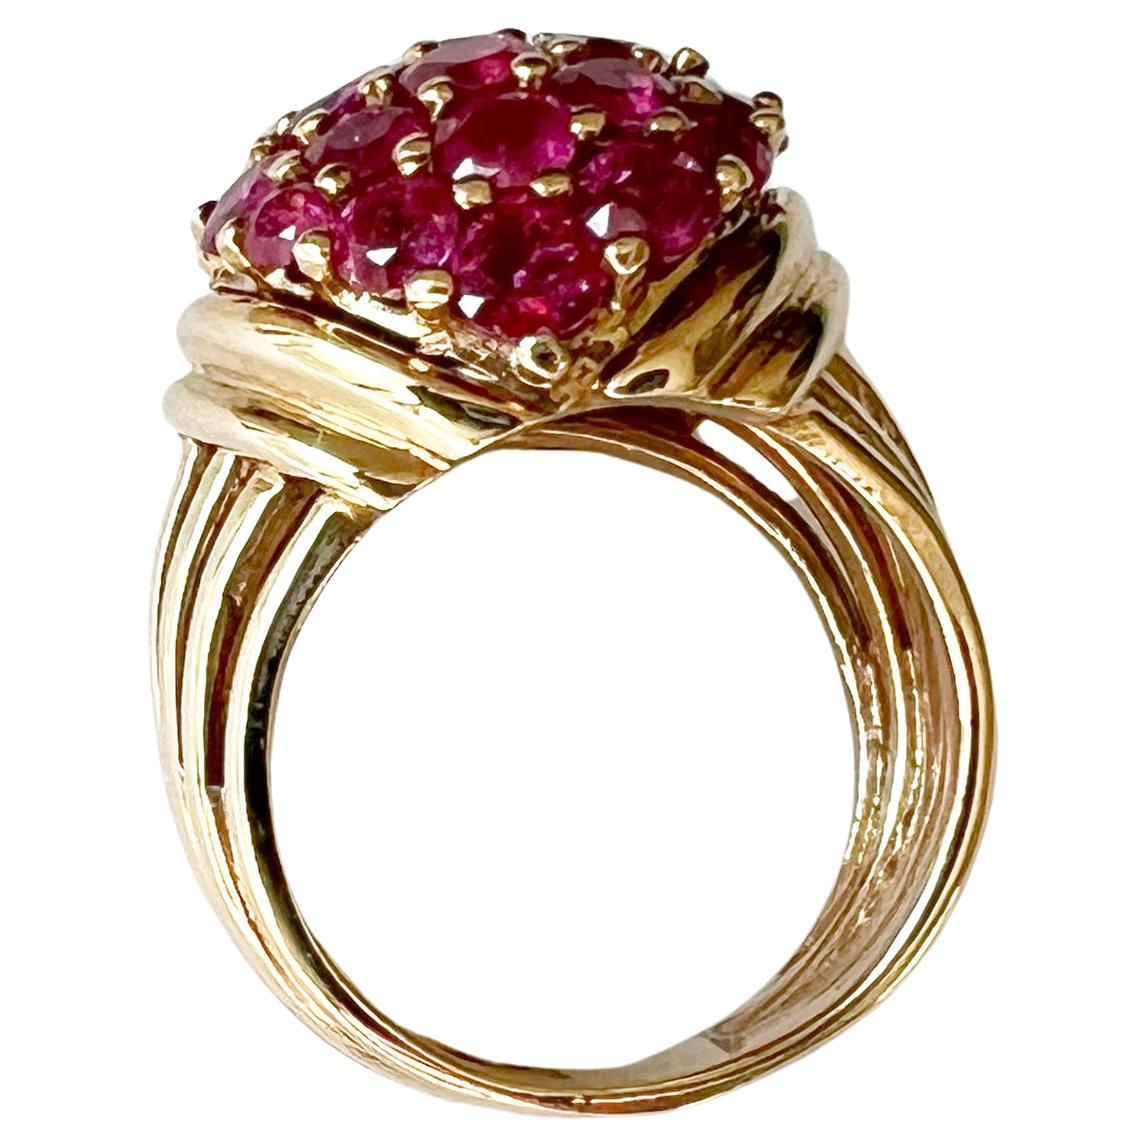 Women's 1960s 14K Gold and Pave Rubies Bombe Cocktail Ring For Sale